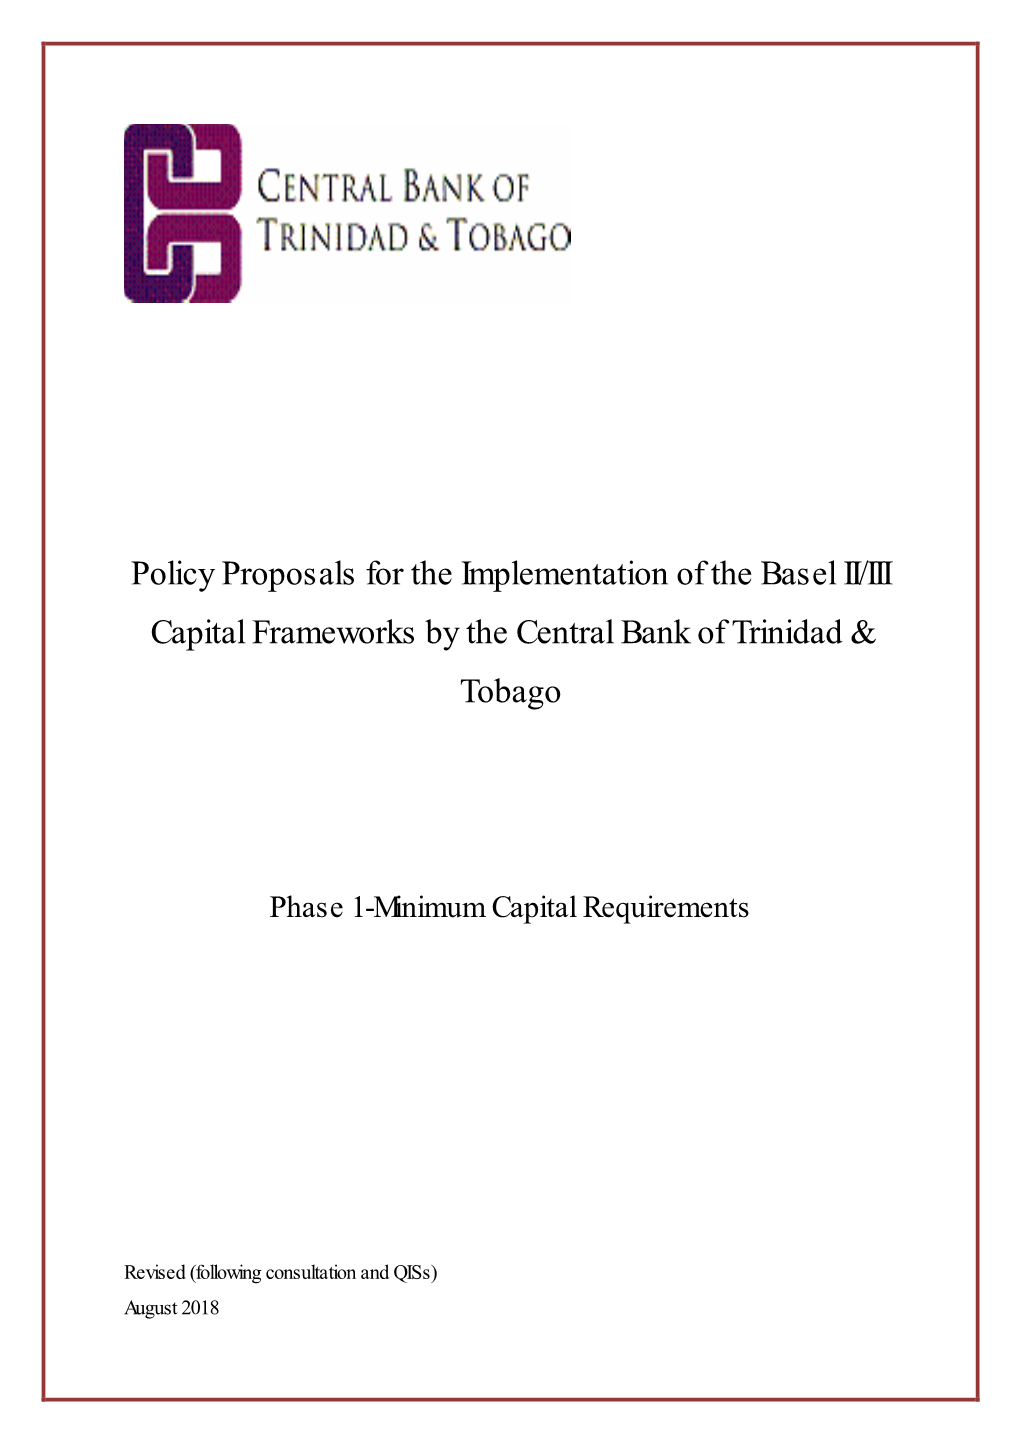 Proposals for the Implementation of Basel II and Basel III in Trinidad And